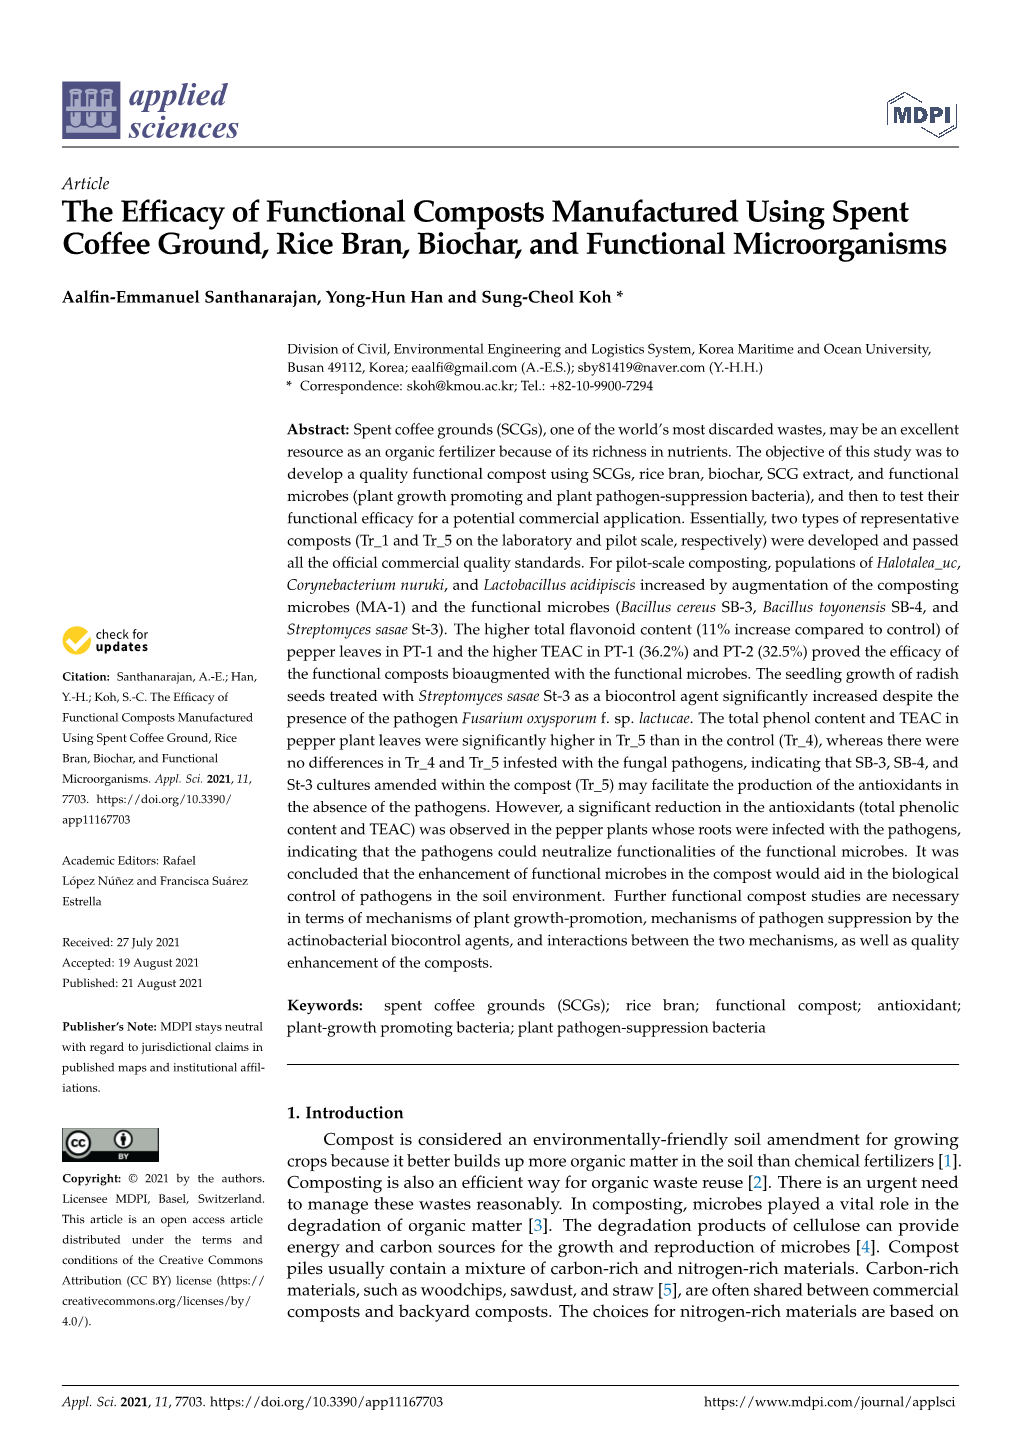 The Efficacy of Functional Composts Manufactured Using Spent Coffee Ground, Rice Bran, Biochar, and Functional Microorganisms